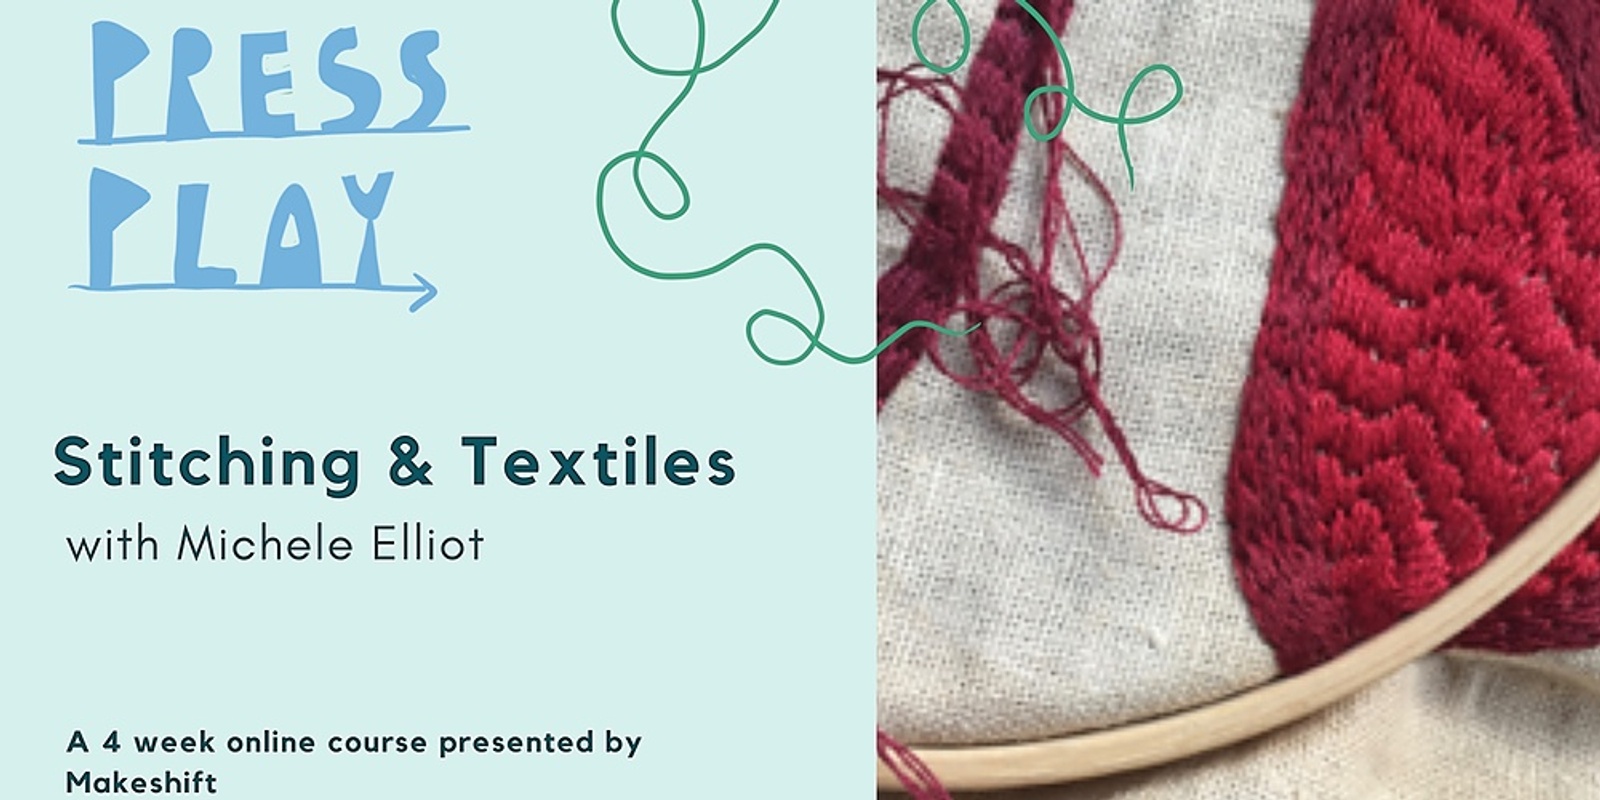 Banner image for Press Play: Stitching & Textiles